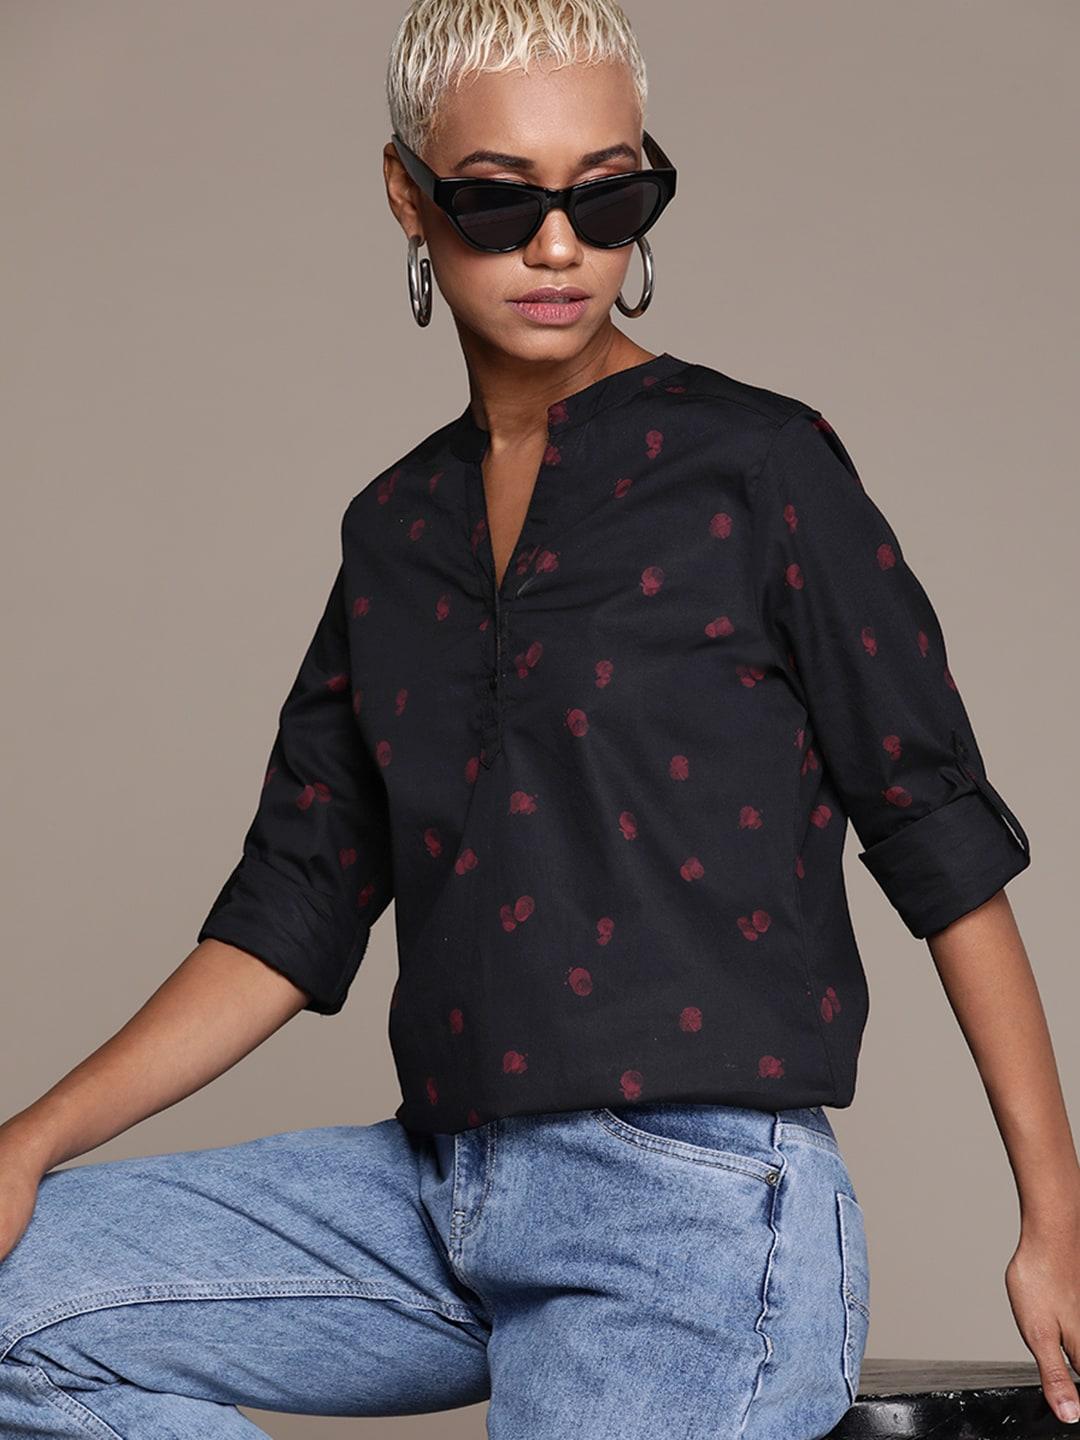 The Roadster Lifestyle Co. Printed Mandarin Collar Cotton Shirt Style Top